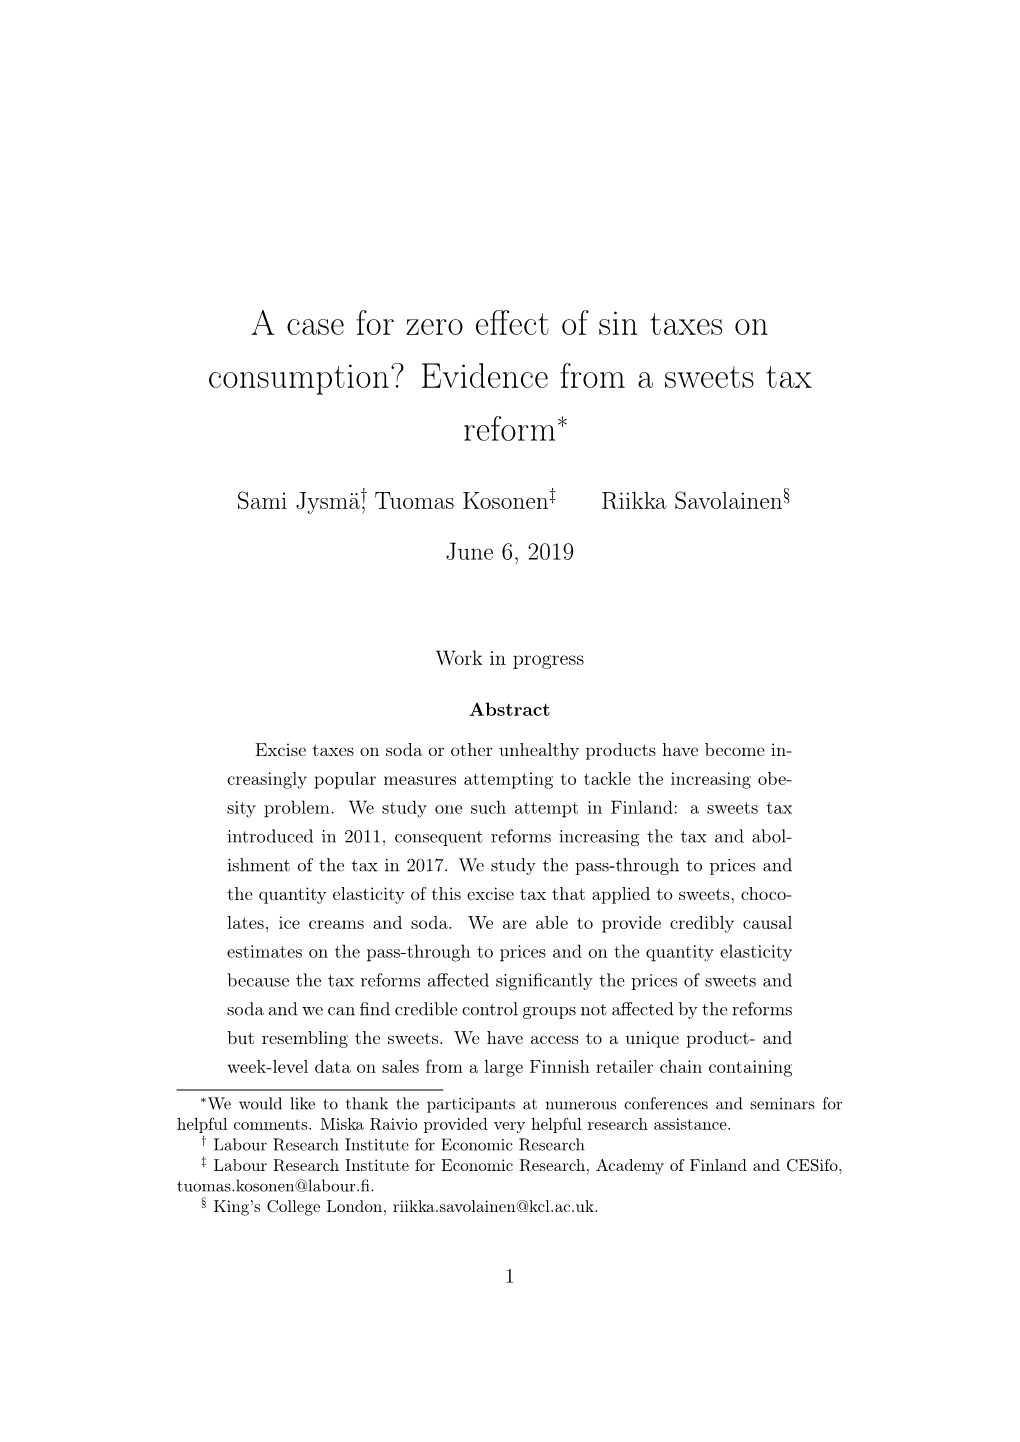 A Case for Zero Effect of Sin Taxes on Consumption? Evidence from A